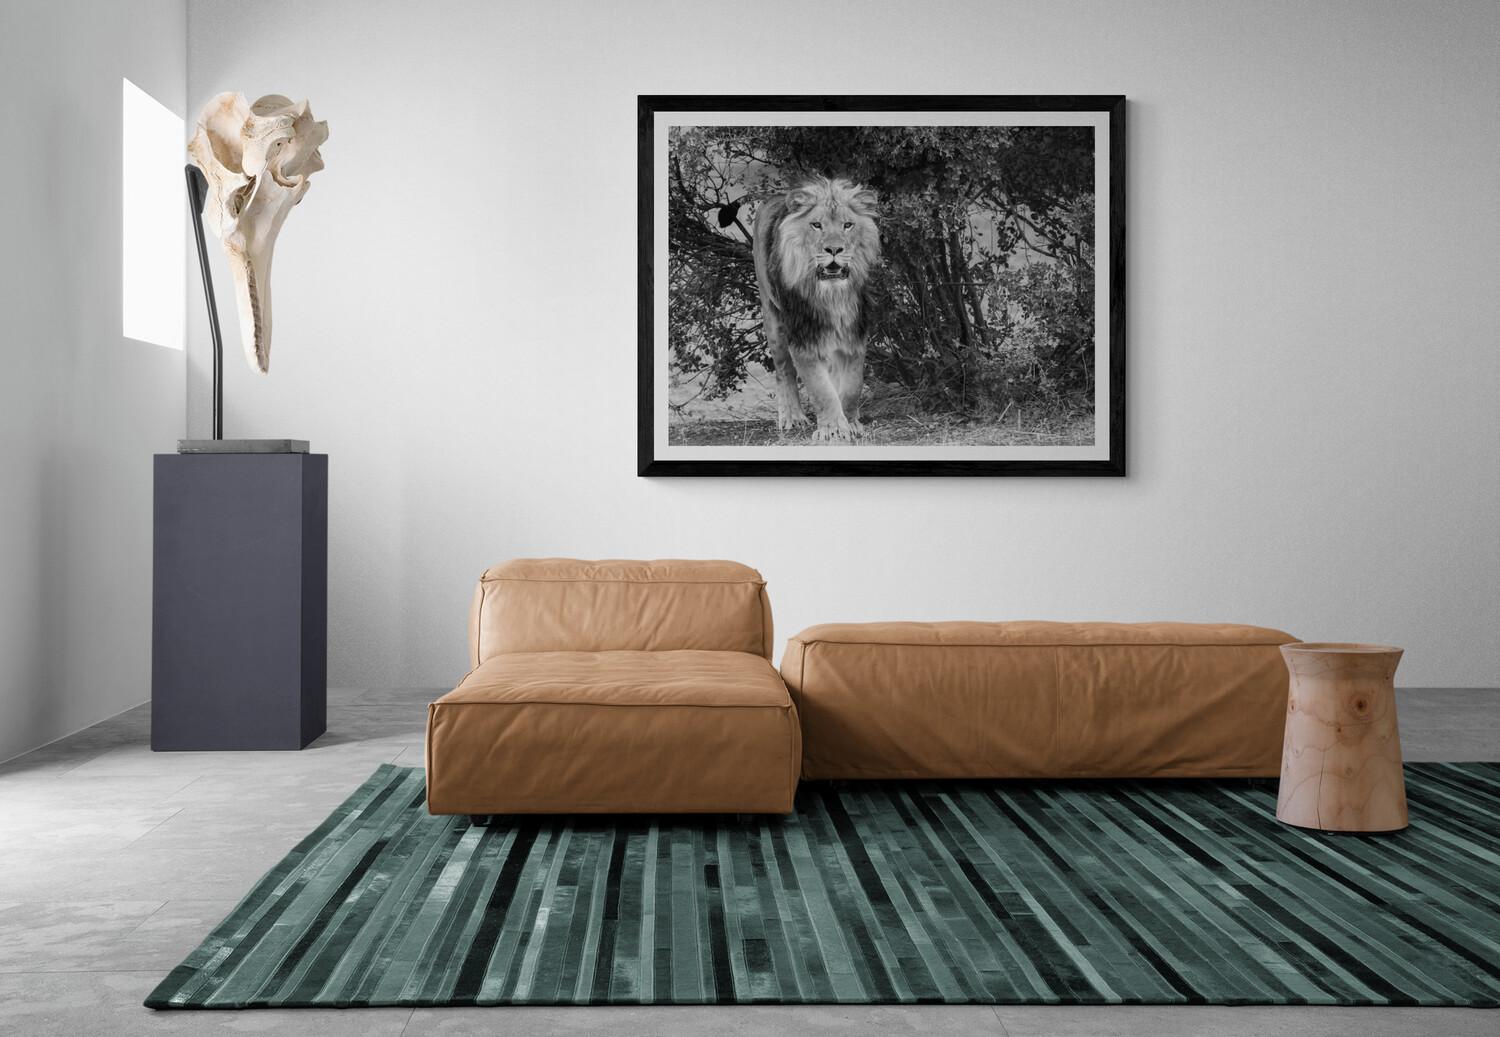 This is a contemporary photograph of an African Lion shot by Shane Russeck
Edition of 10
Signed and numbered 
Printed on archival luster paper.  

Shane Russeck has built a reputation for capturing America's landscapes, cultures and endangered